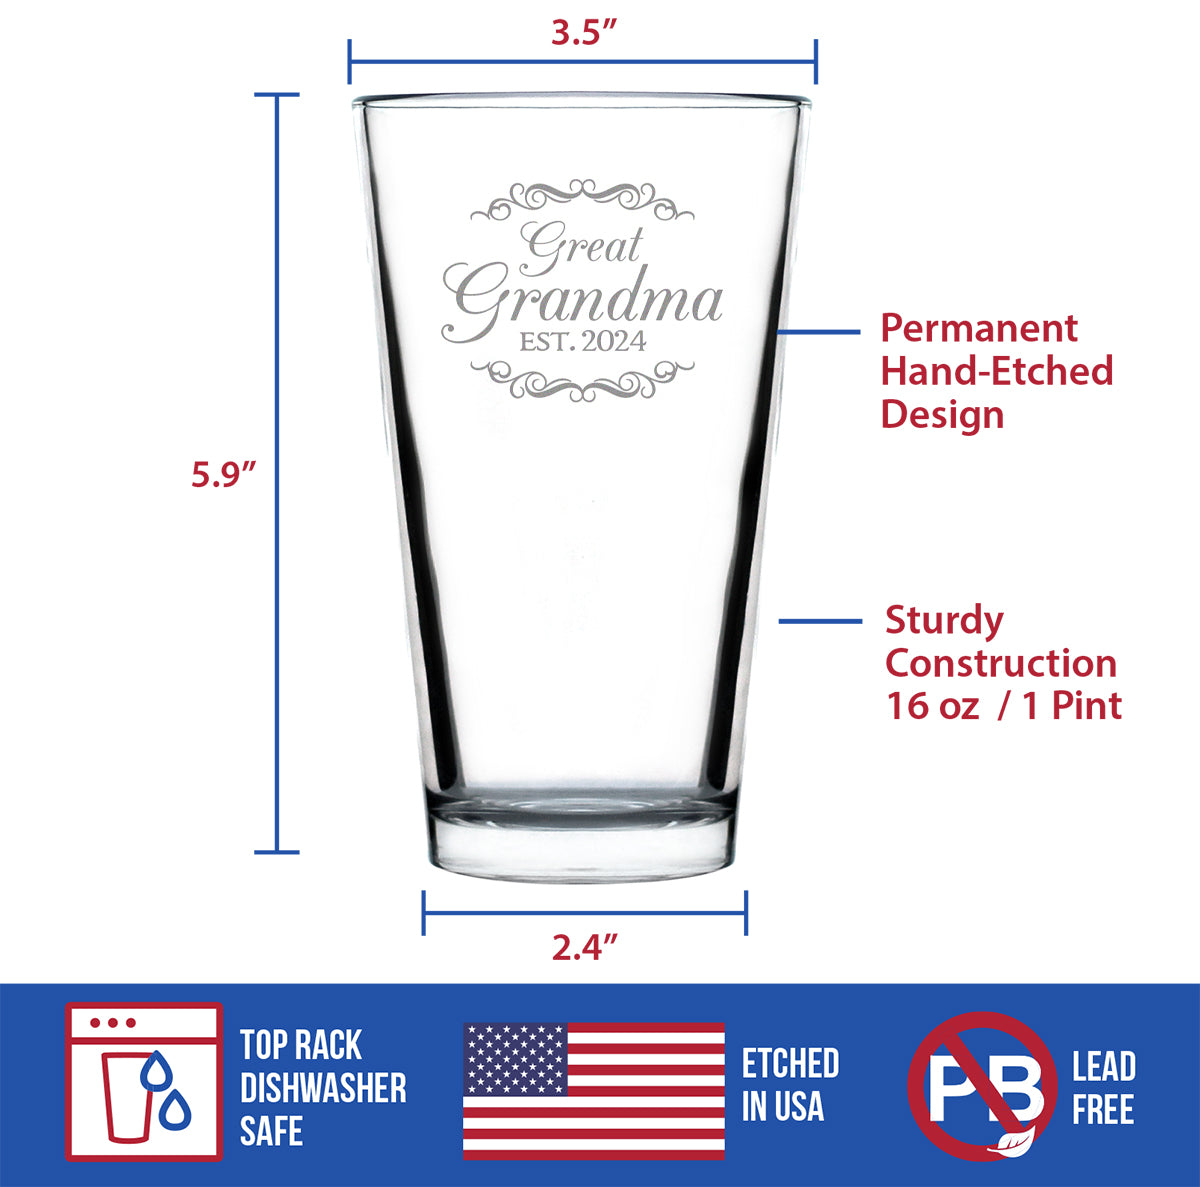 Great Grandma Est 2024 - New Great Grandmother Pint Glass Gift for First Time Great Grandparents - Decorative 16 Oz Glasses